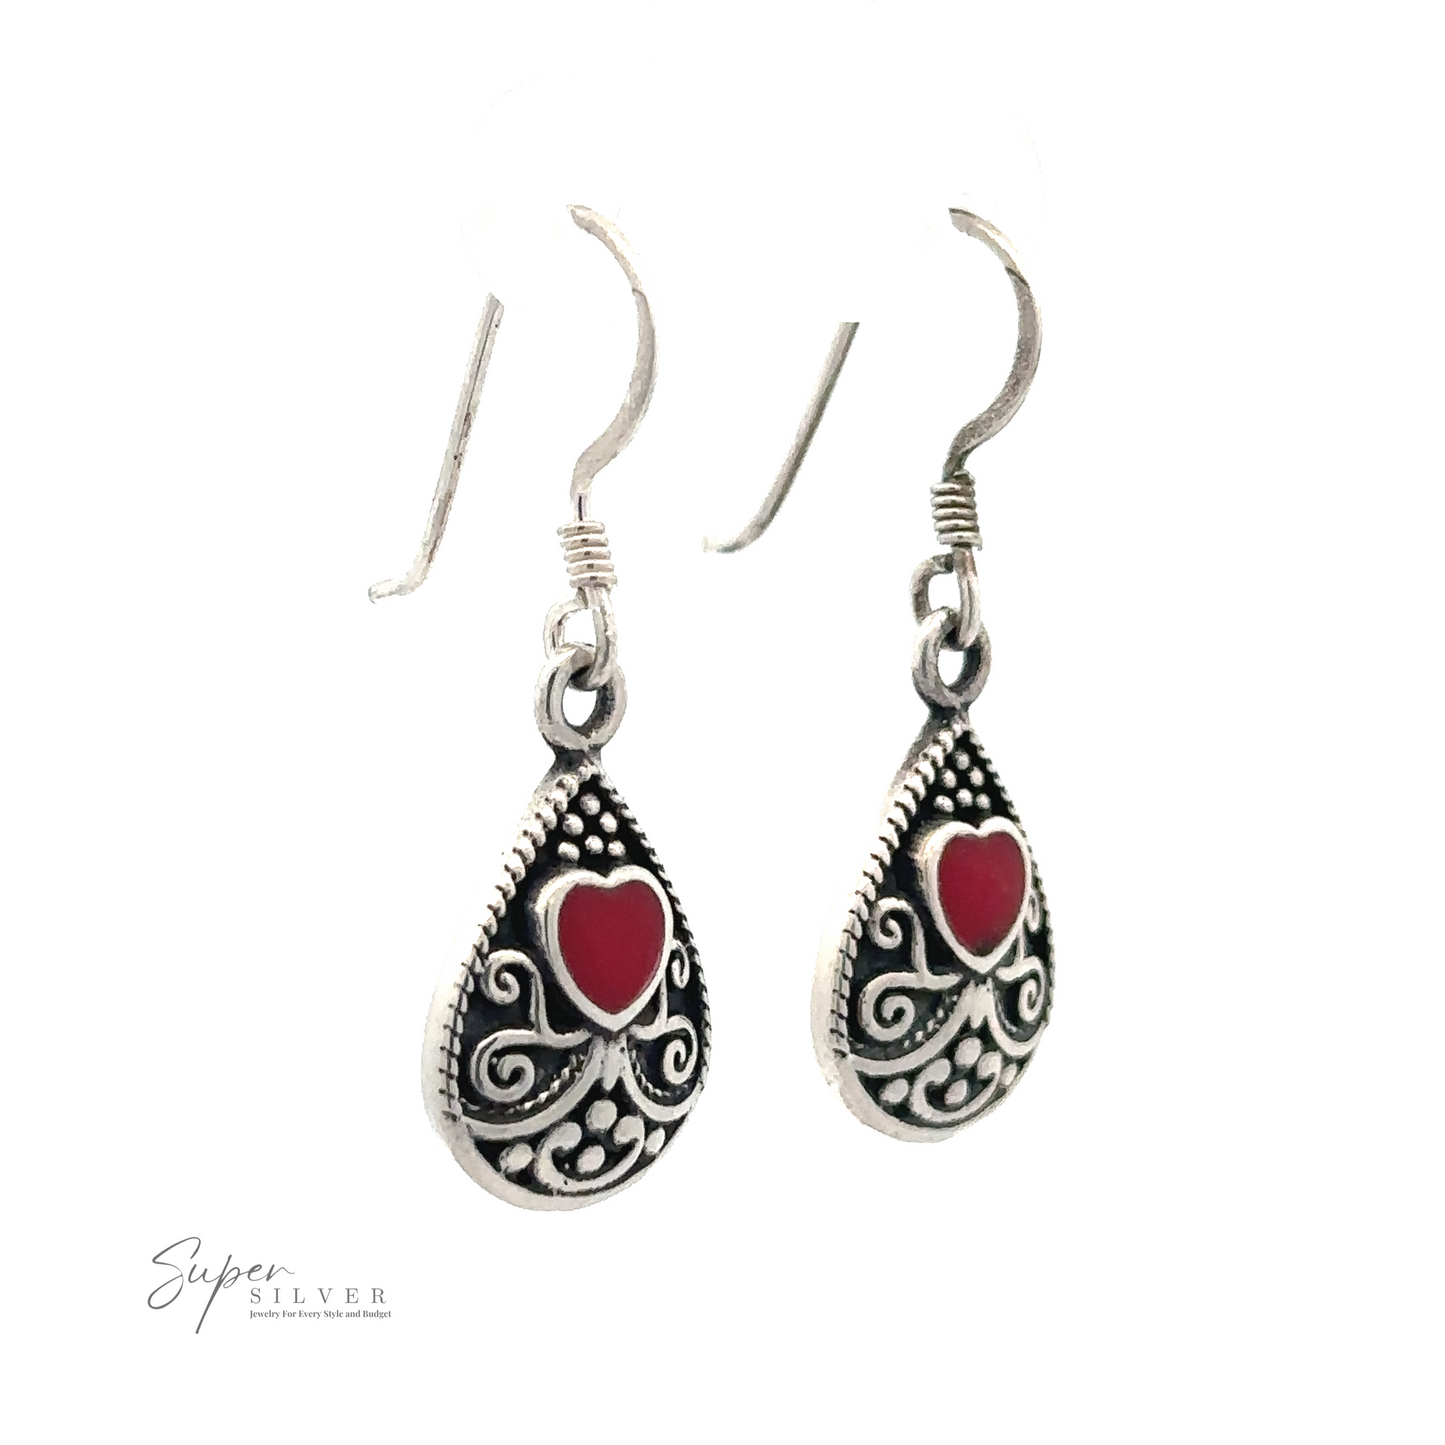 Bali Style Teardrop Earrings with Inlaid Stone featuring red heart motifs and intricate scrolling patterns, adorned with subtle Bali style elegance.